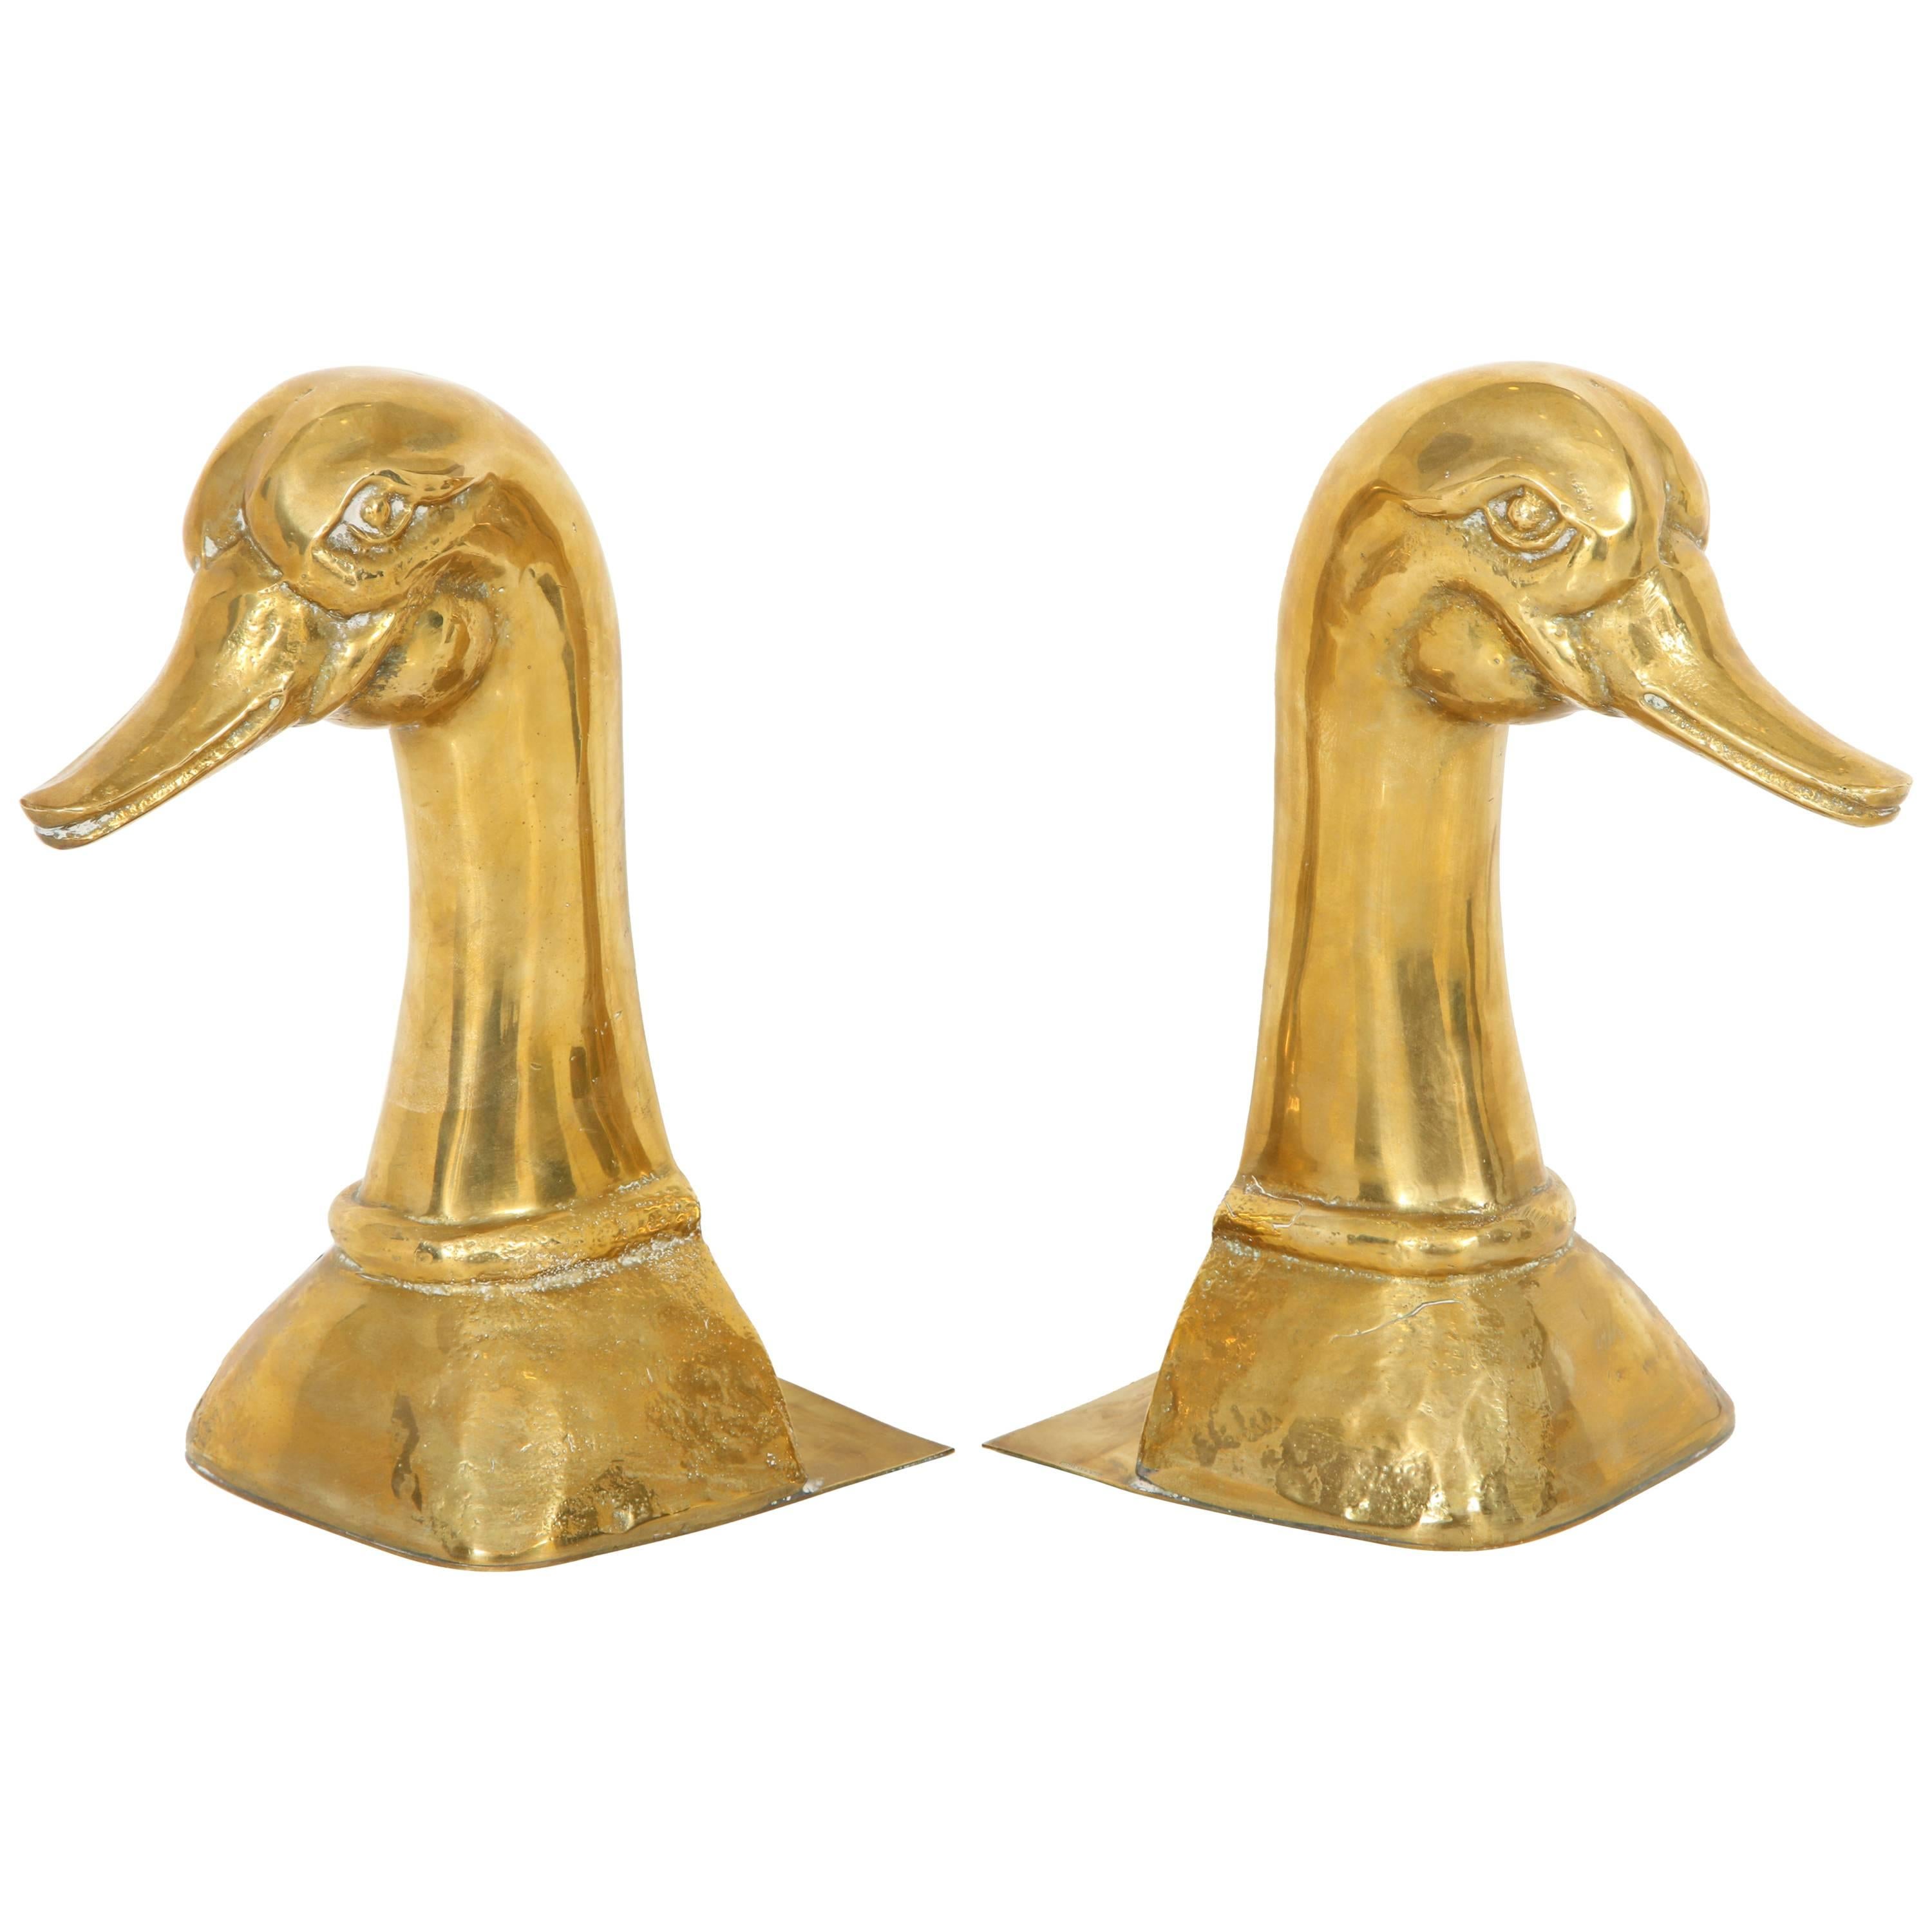 Pair of Polished Brass Duck Bookends by Sarried